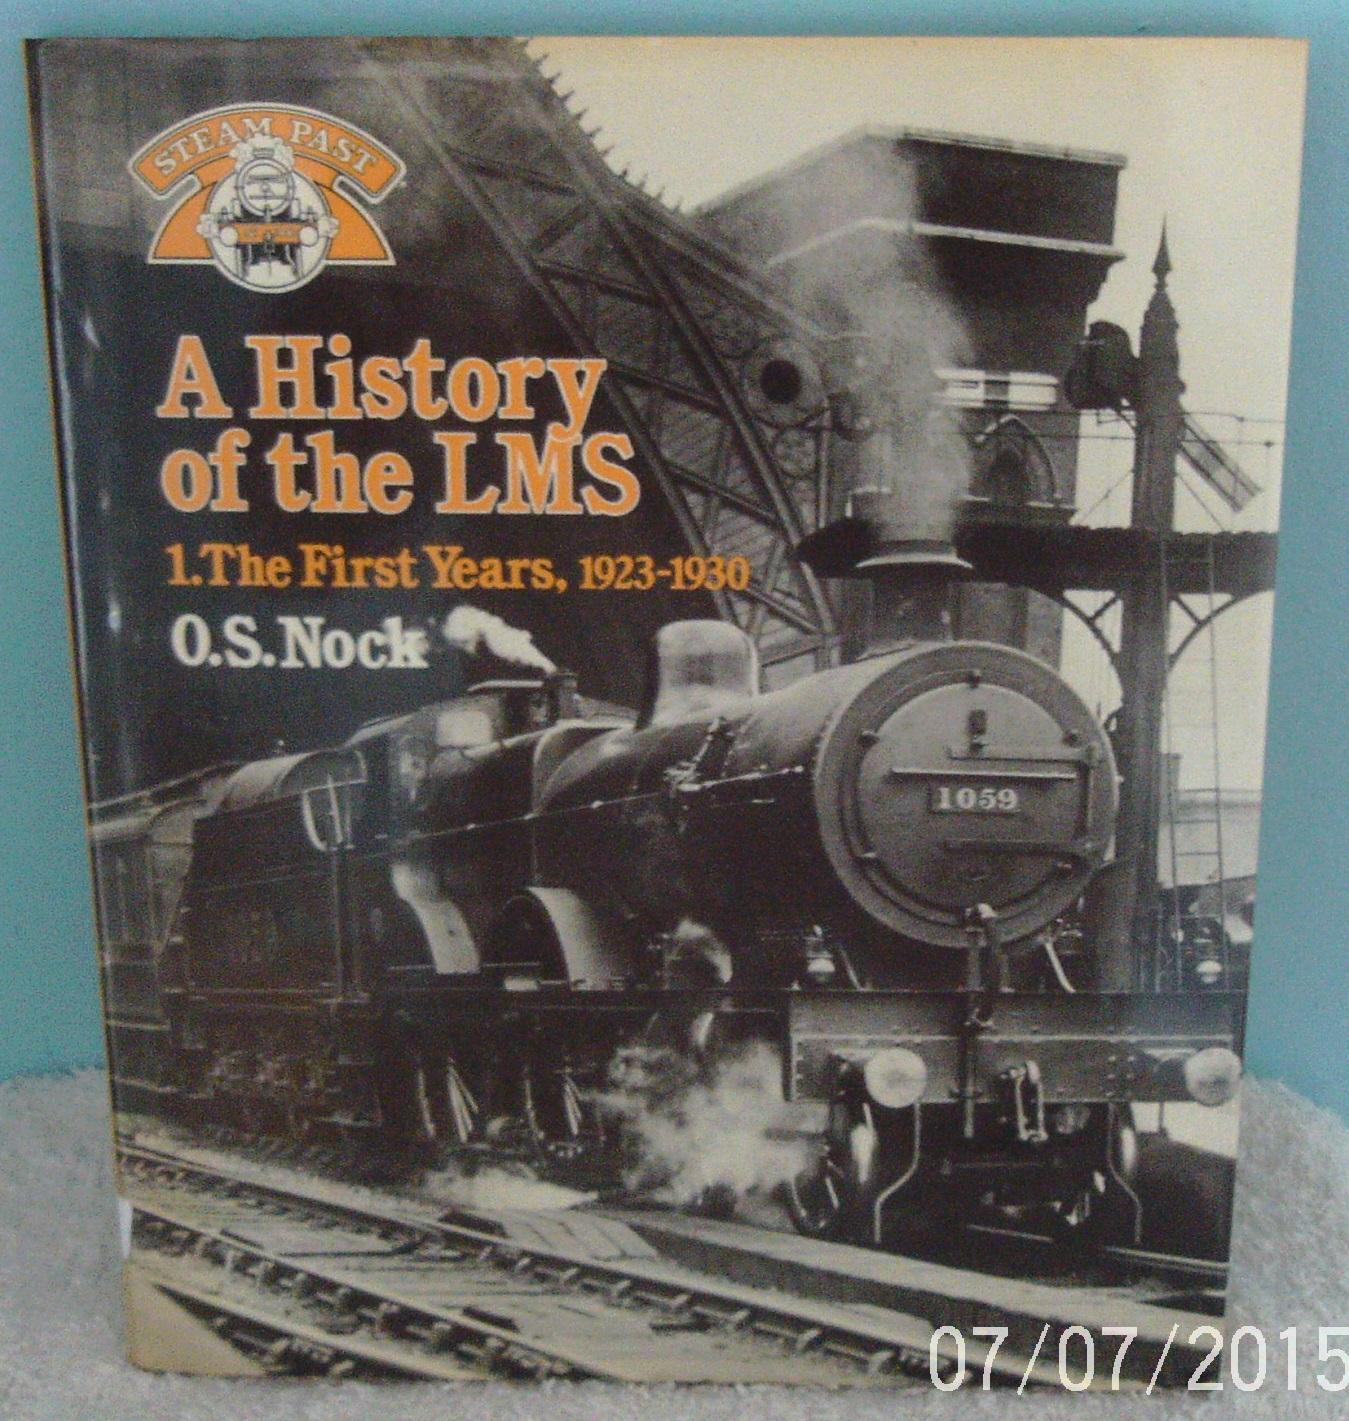 A History of the LMS London, Midland and Scottish Railway, Volume 1: The First Years, 1923-1930 (Steam Past Series): 1 - Nock, O. S.